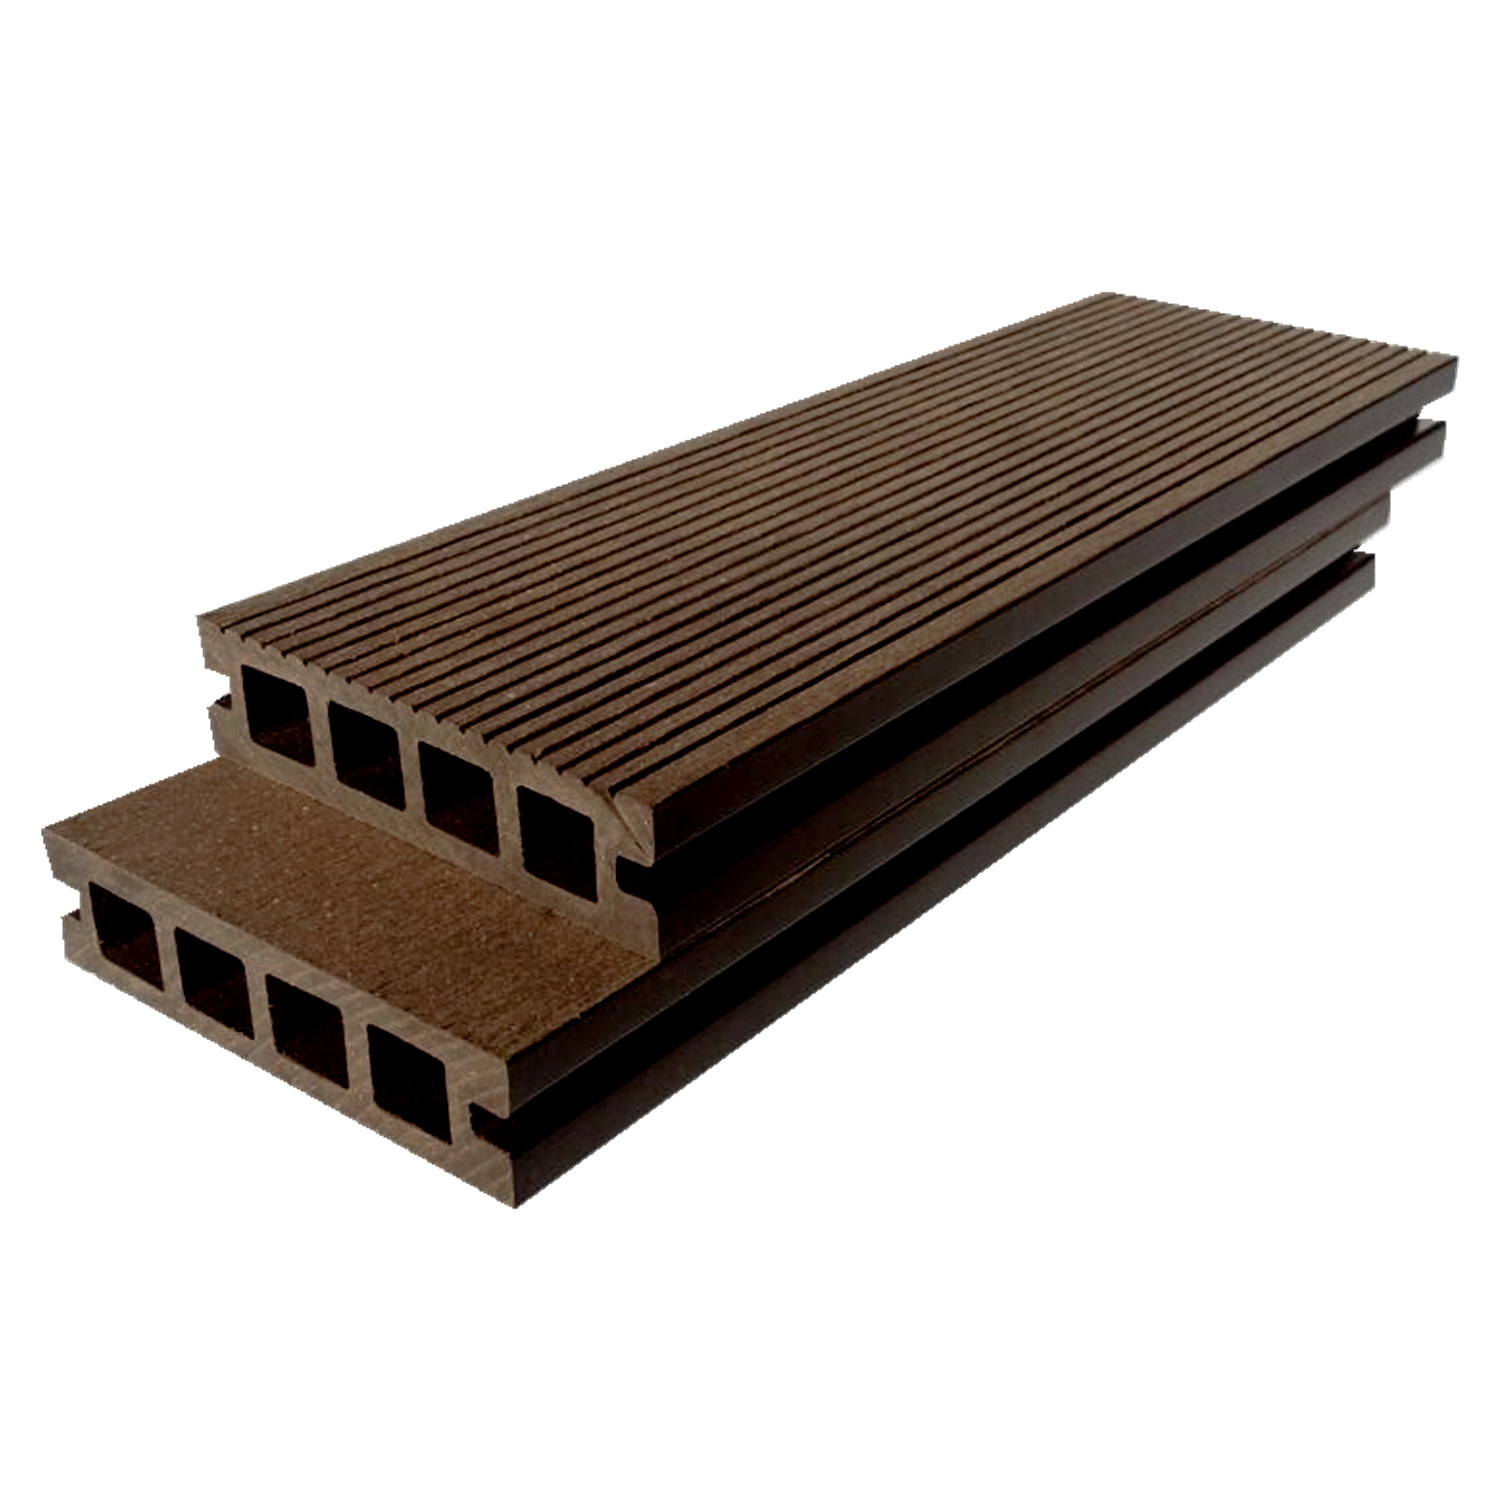  Exterior Anti-uv Wood Plastic Co extrusion Decorative Corner for wall panel is Outdoor Composite wpc decking floor L edge cover